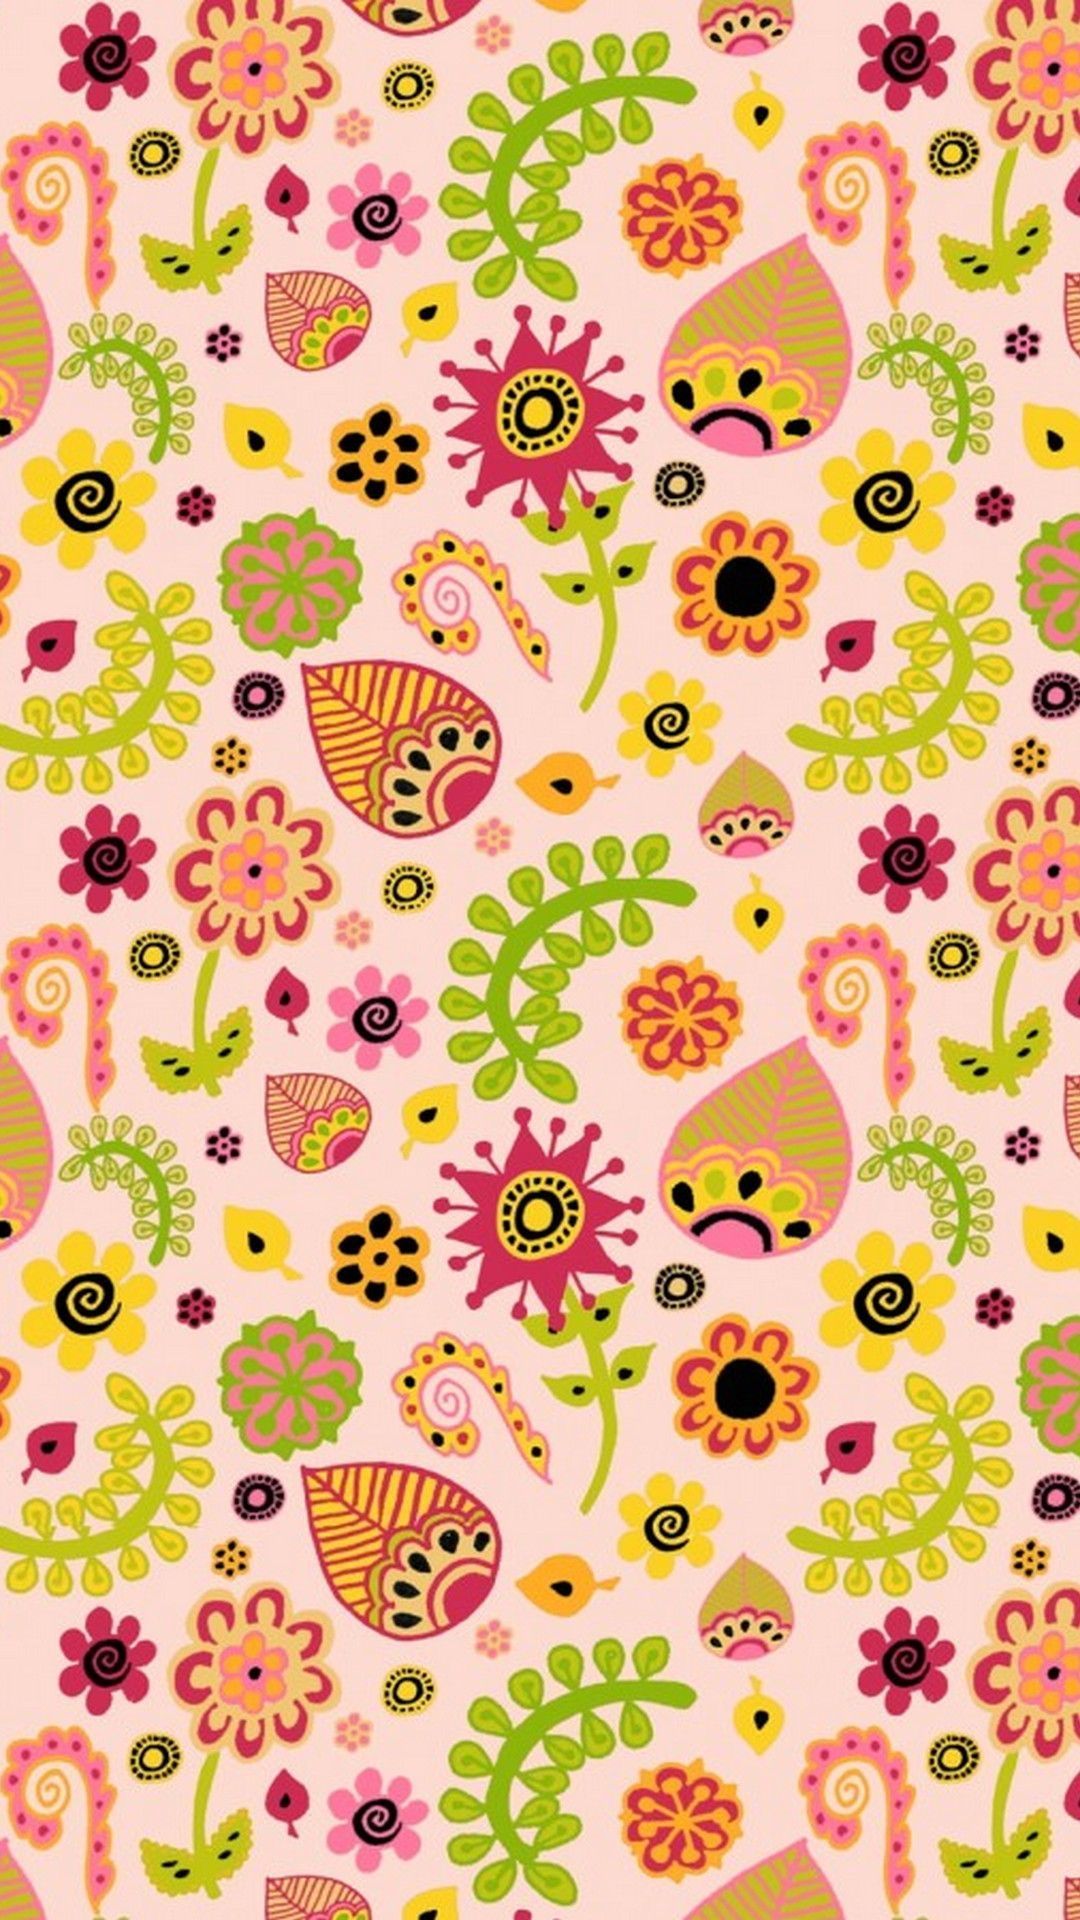 IPhone wallpaper with colorful flowers and birds on a pink background - Cute